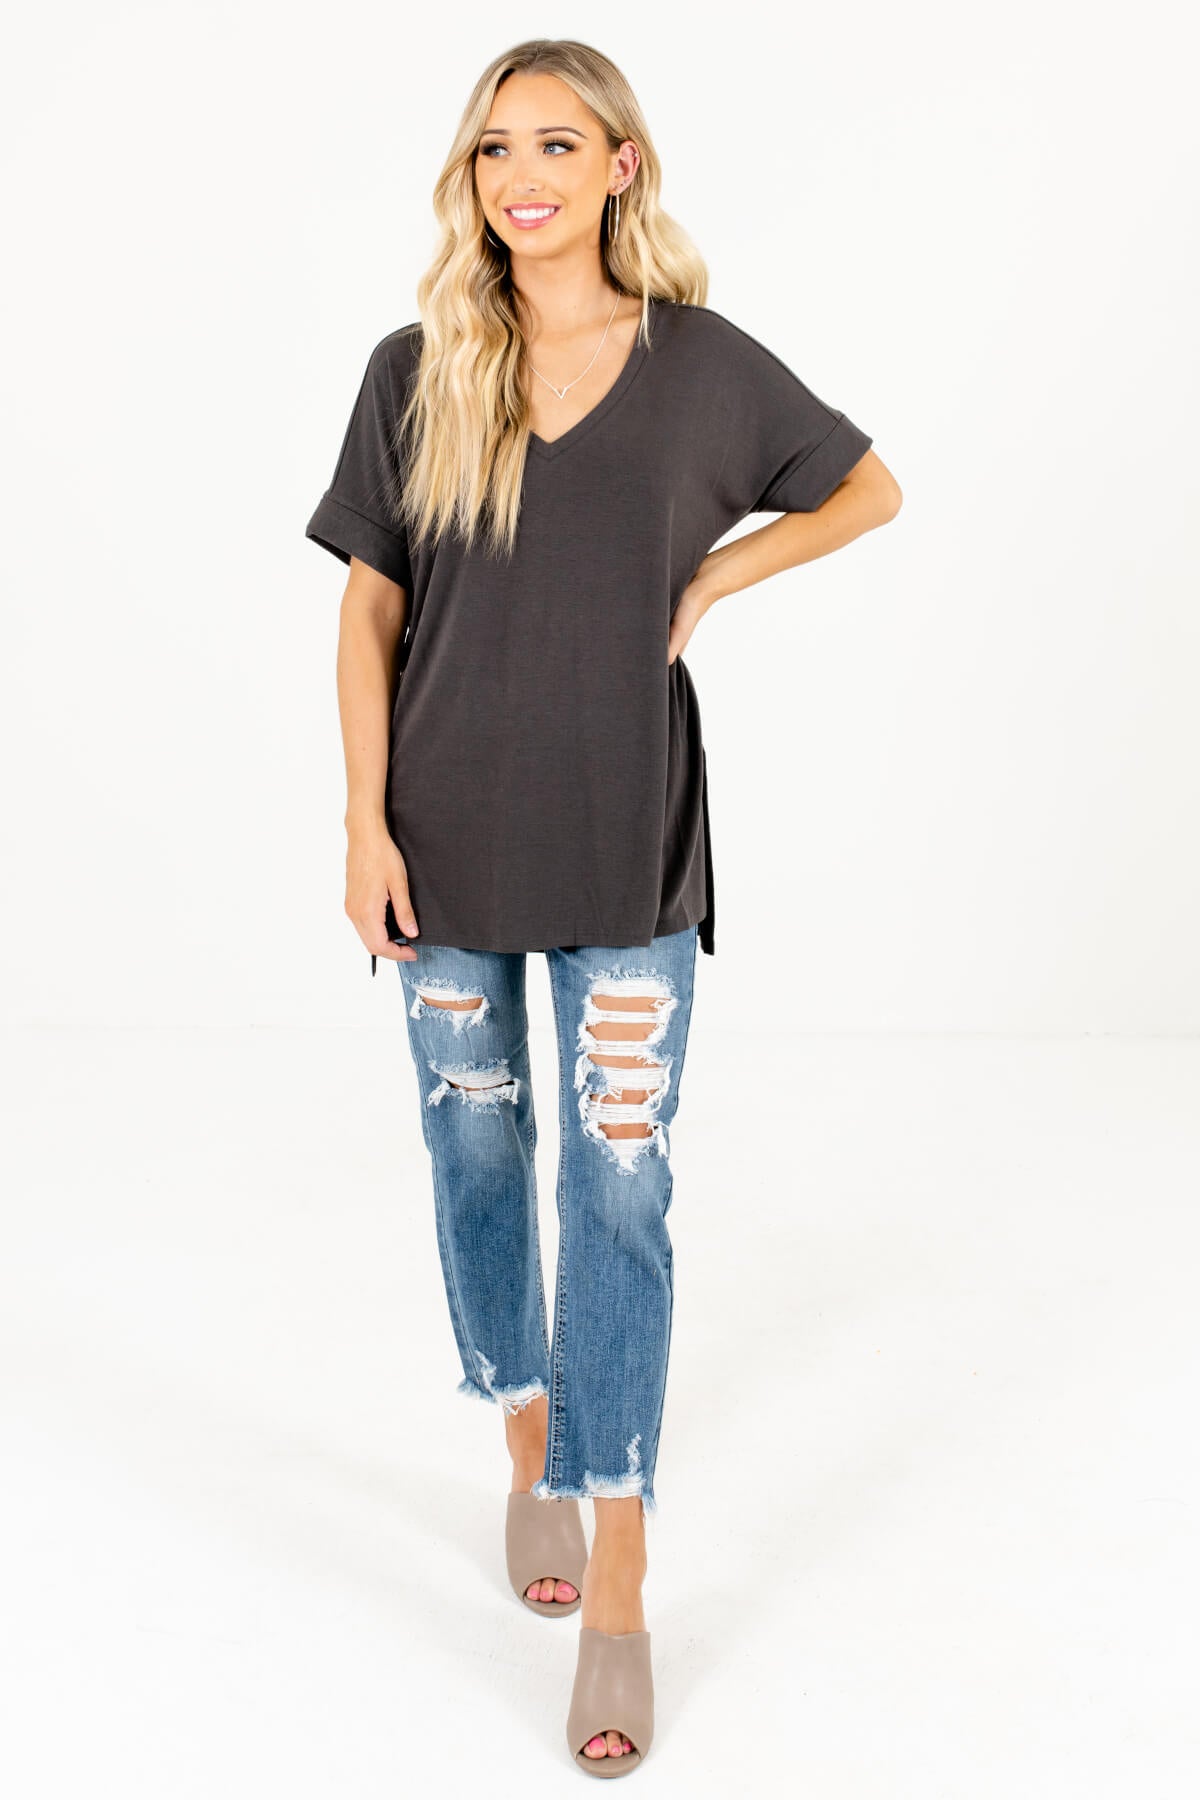 Ash Gray Lightweight Material Boutique Tops for Women